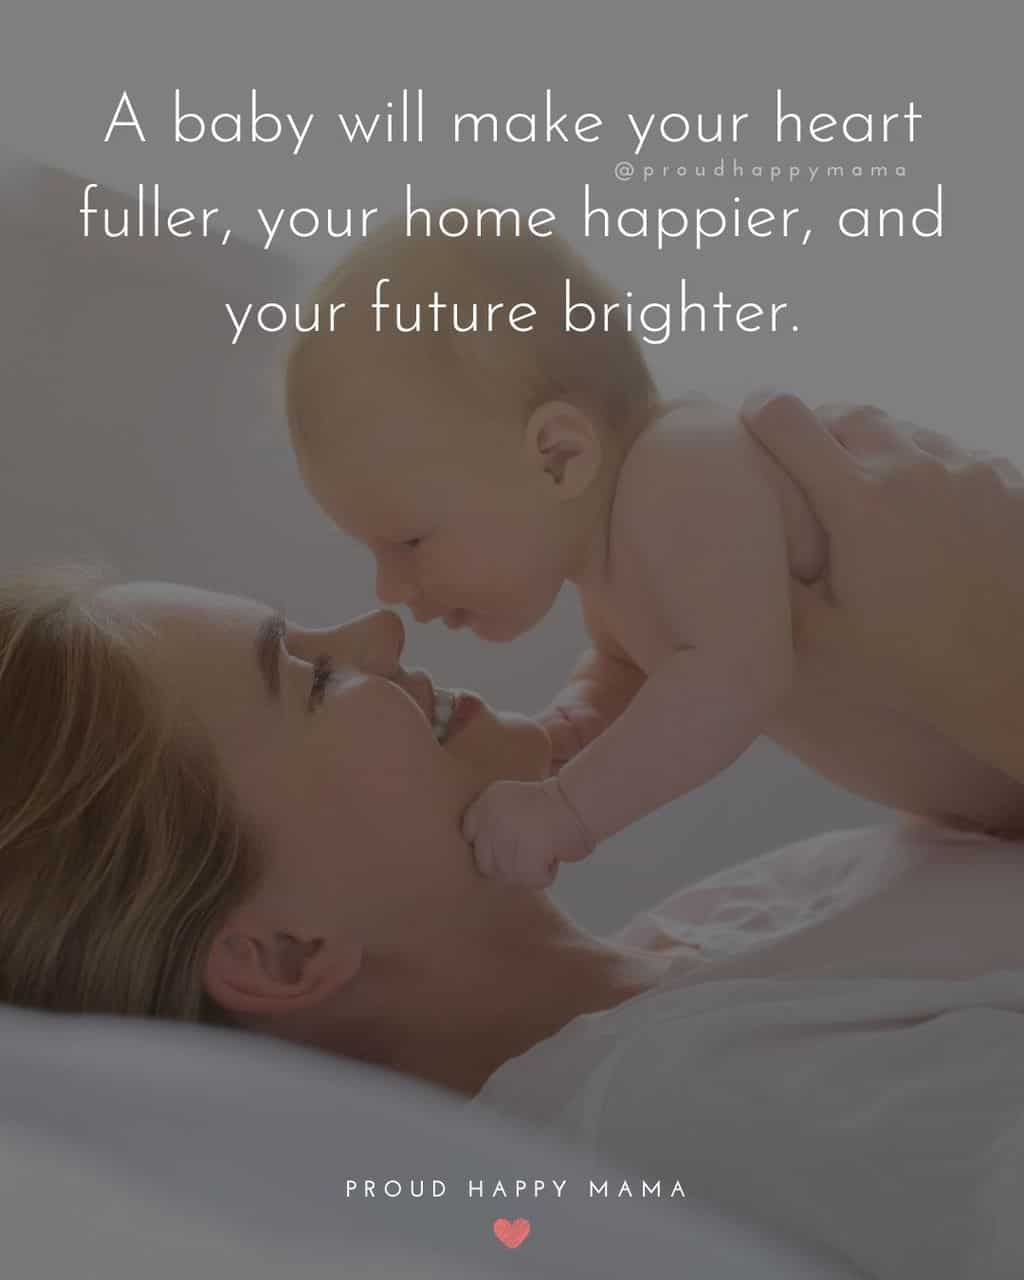 Baby Girl Quotes - A baby will make your heart fuller, your home happier, and your future brighter.